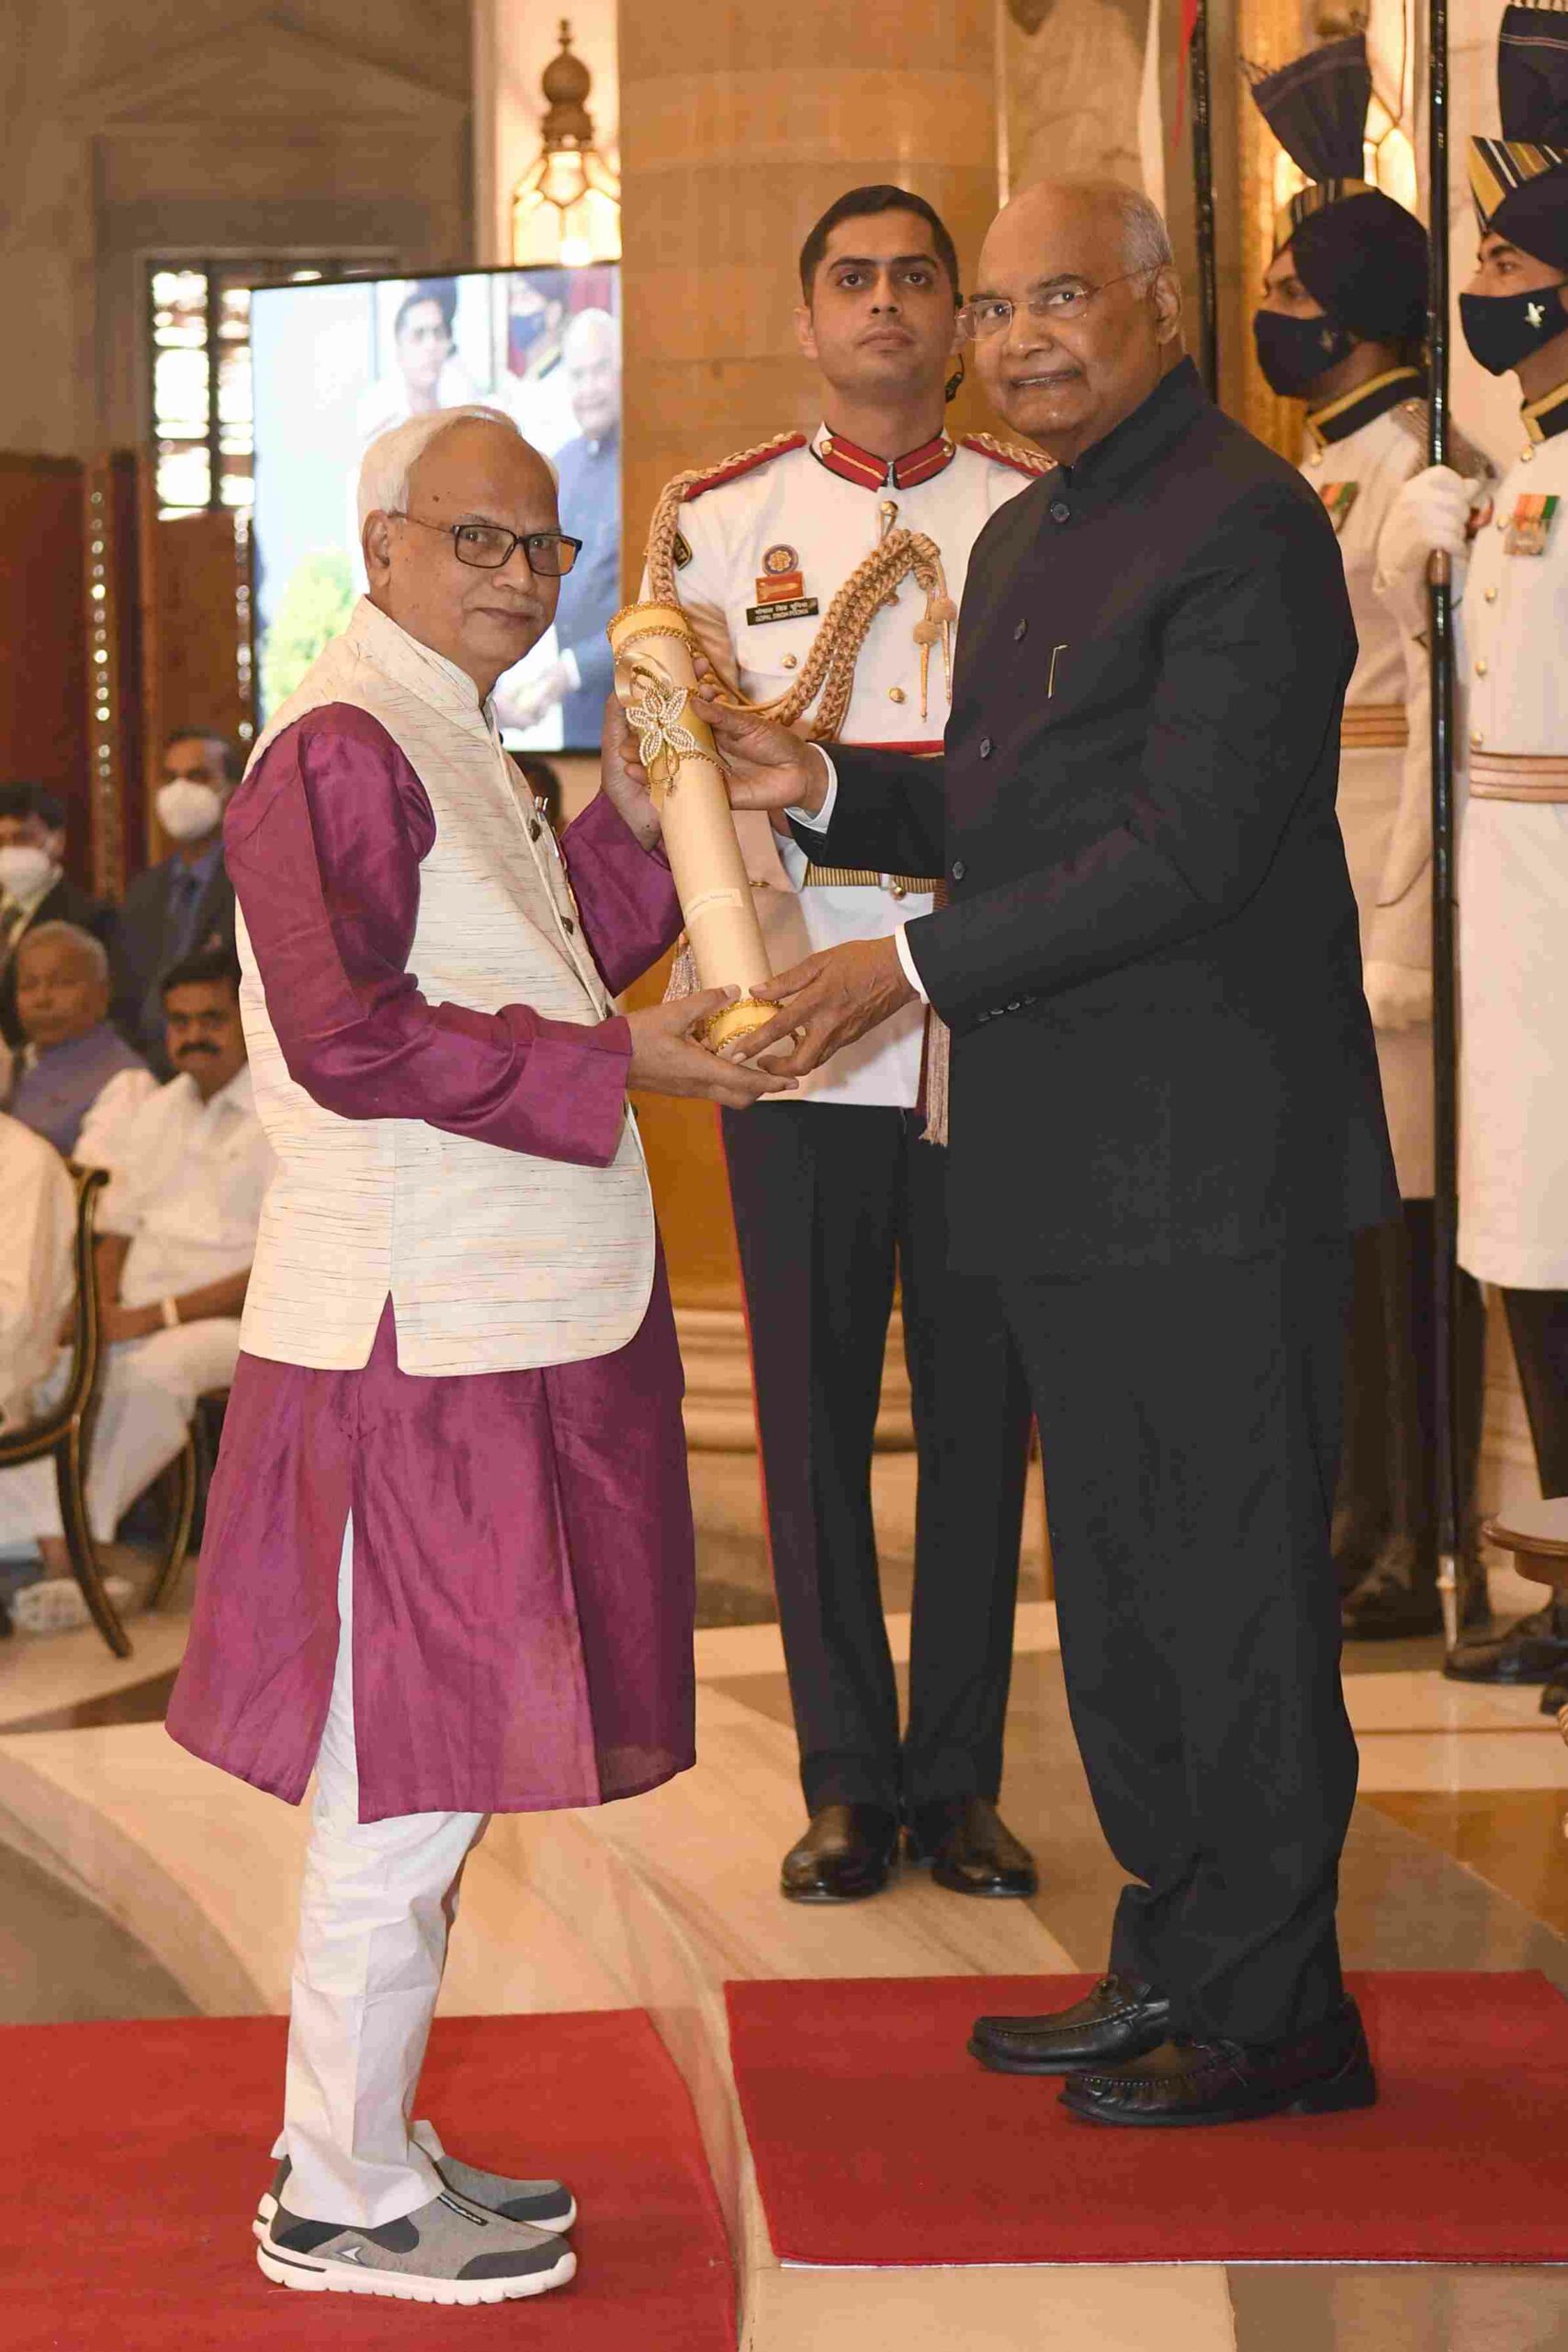 Dr Arunoday Mondal receiving the Padma Shri in 2020